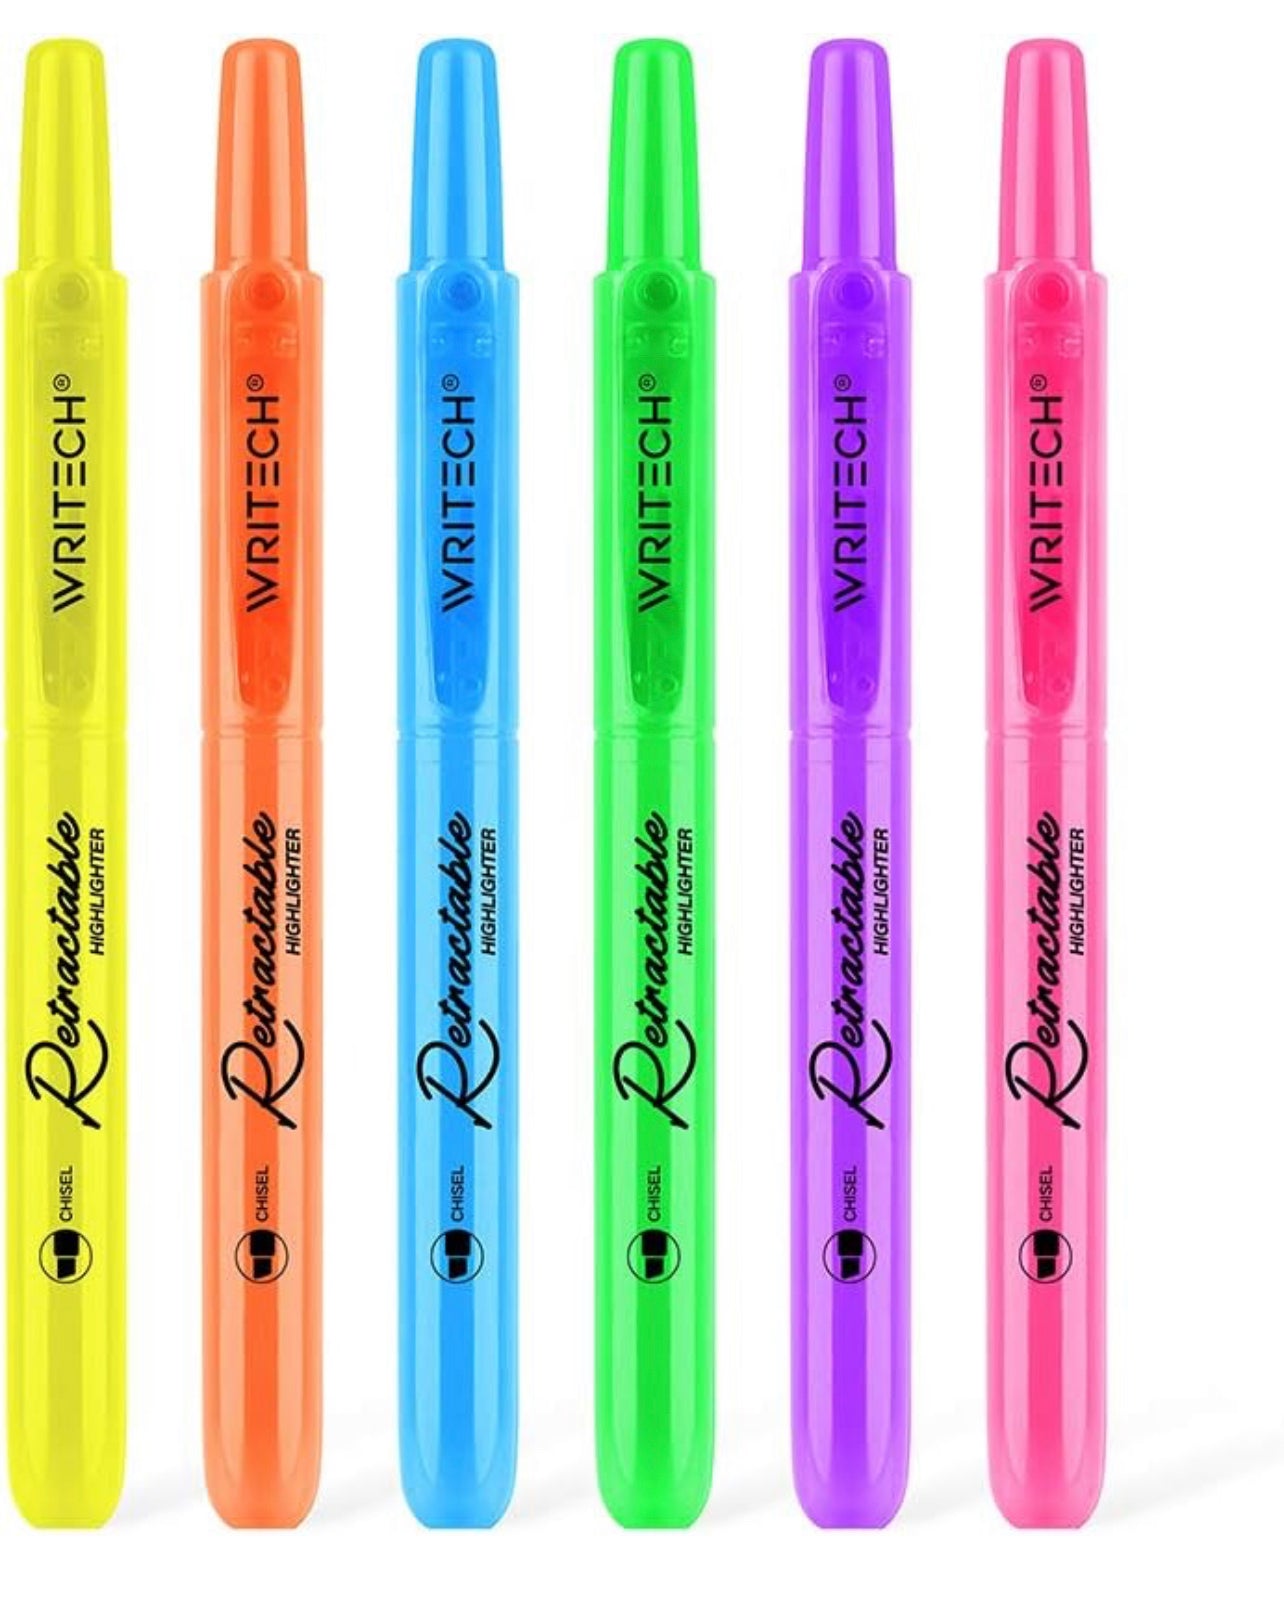 Writech Tetractable Highlighters 6 Neon Colors || اقلام فسفوري كبس ٦ لون نيون رايتيك